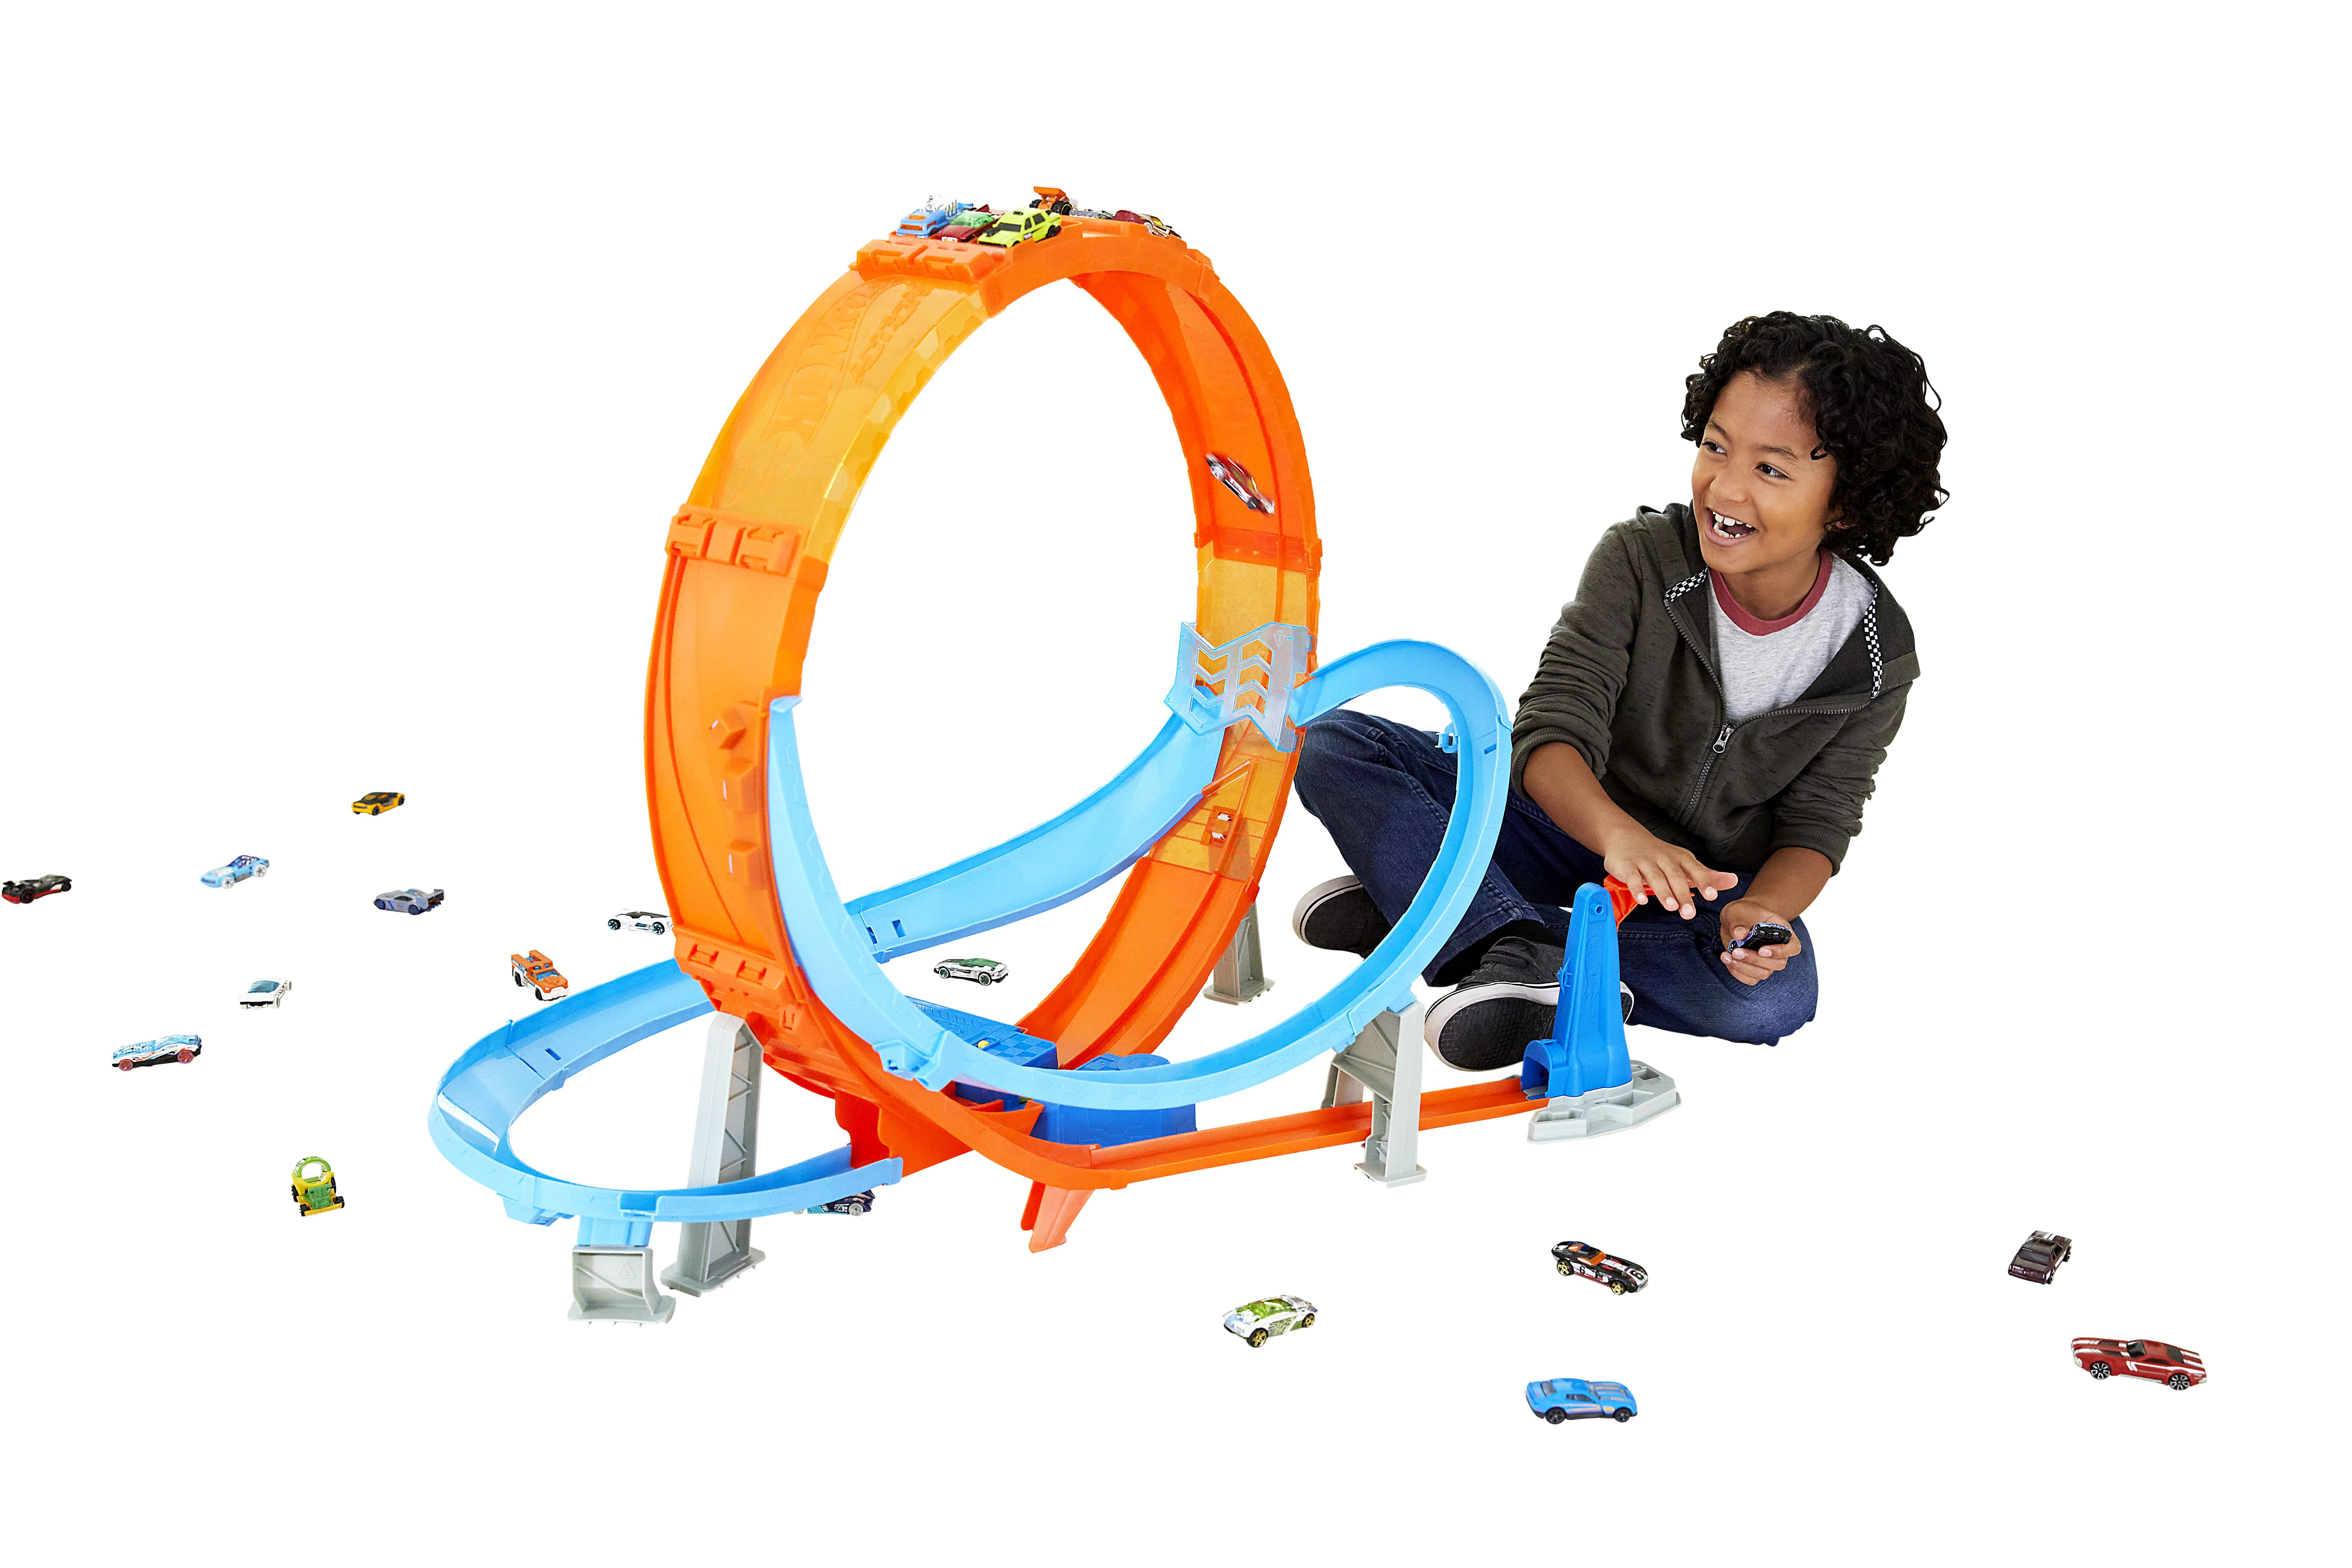 MATTEL HOT WHEELS 2 PIECE TRACK SET 48 INCHES OF TRACK 